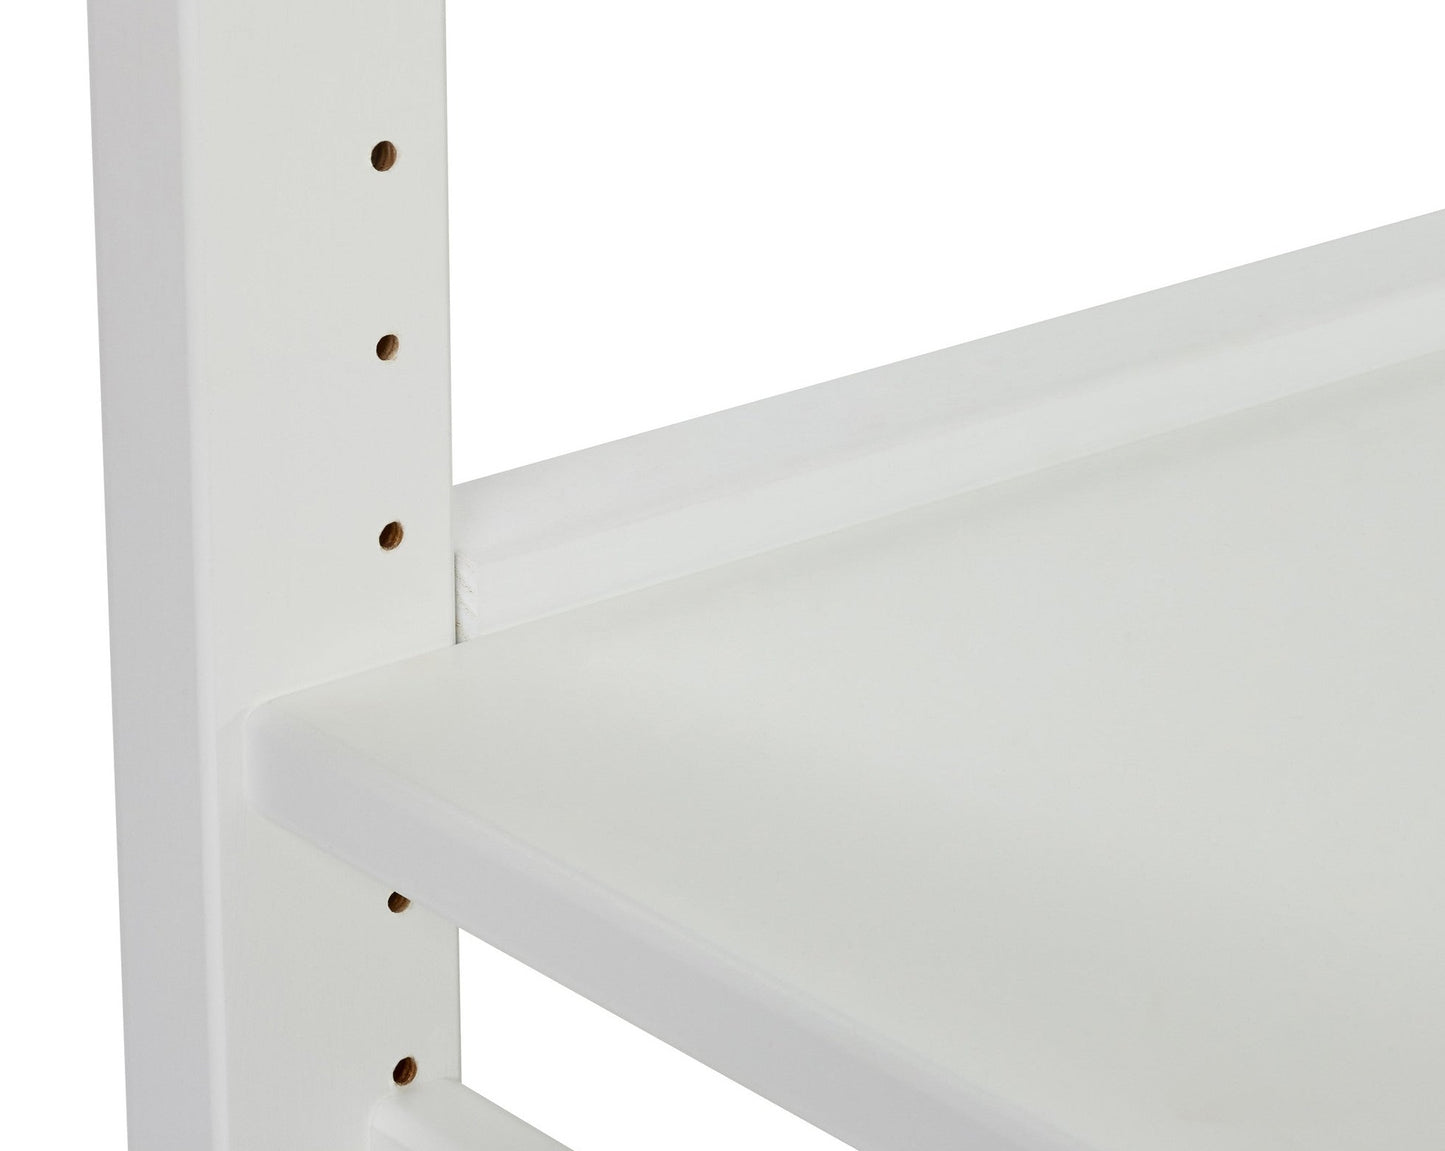 Storey - Shelf with 2 sections and 8 shelves - 100 cm - White